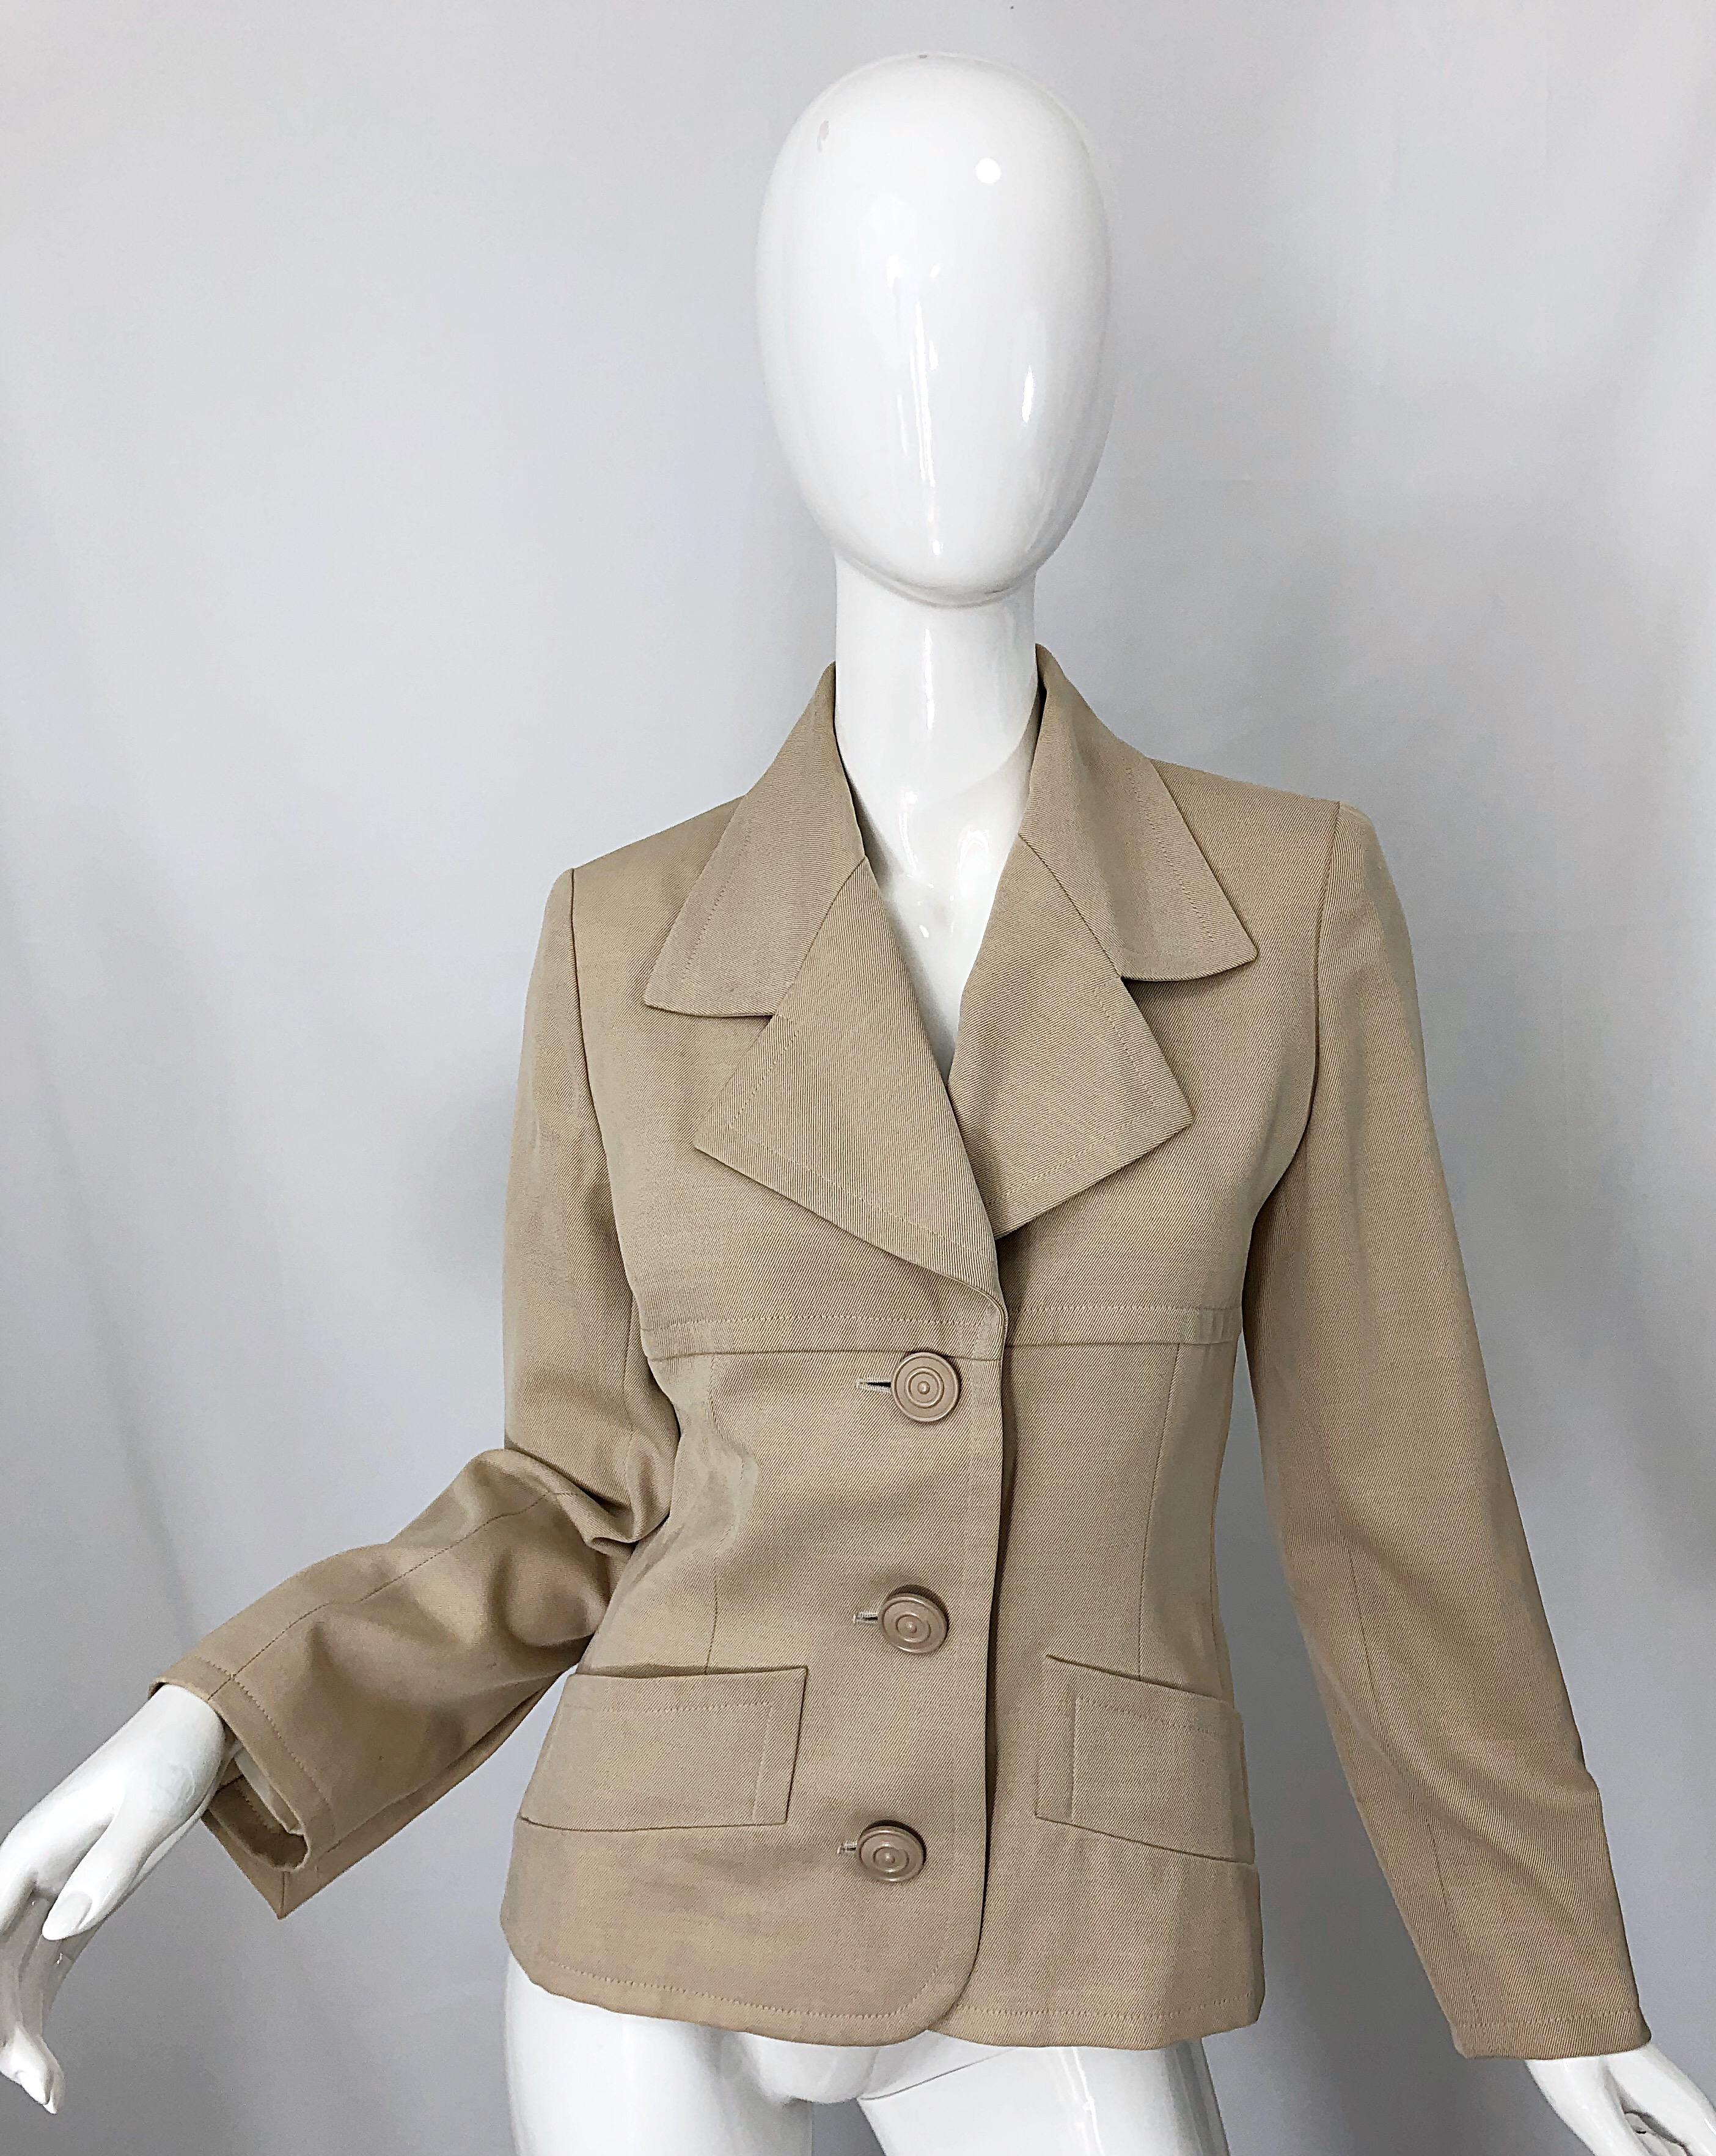 Chic late 1990s GIVENCHY COUTURE by ALEXANDER MCQUEEN khaki lightweight wool jacket / blazer ! Features oversized collar lapels that are reminiscent of 70s Yves Saint Laurent le Smoking jackets Three buttons up the front. Pockets at each side of the